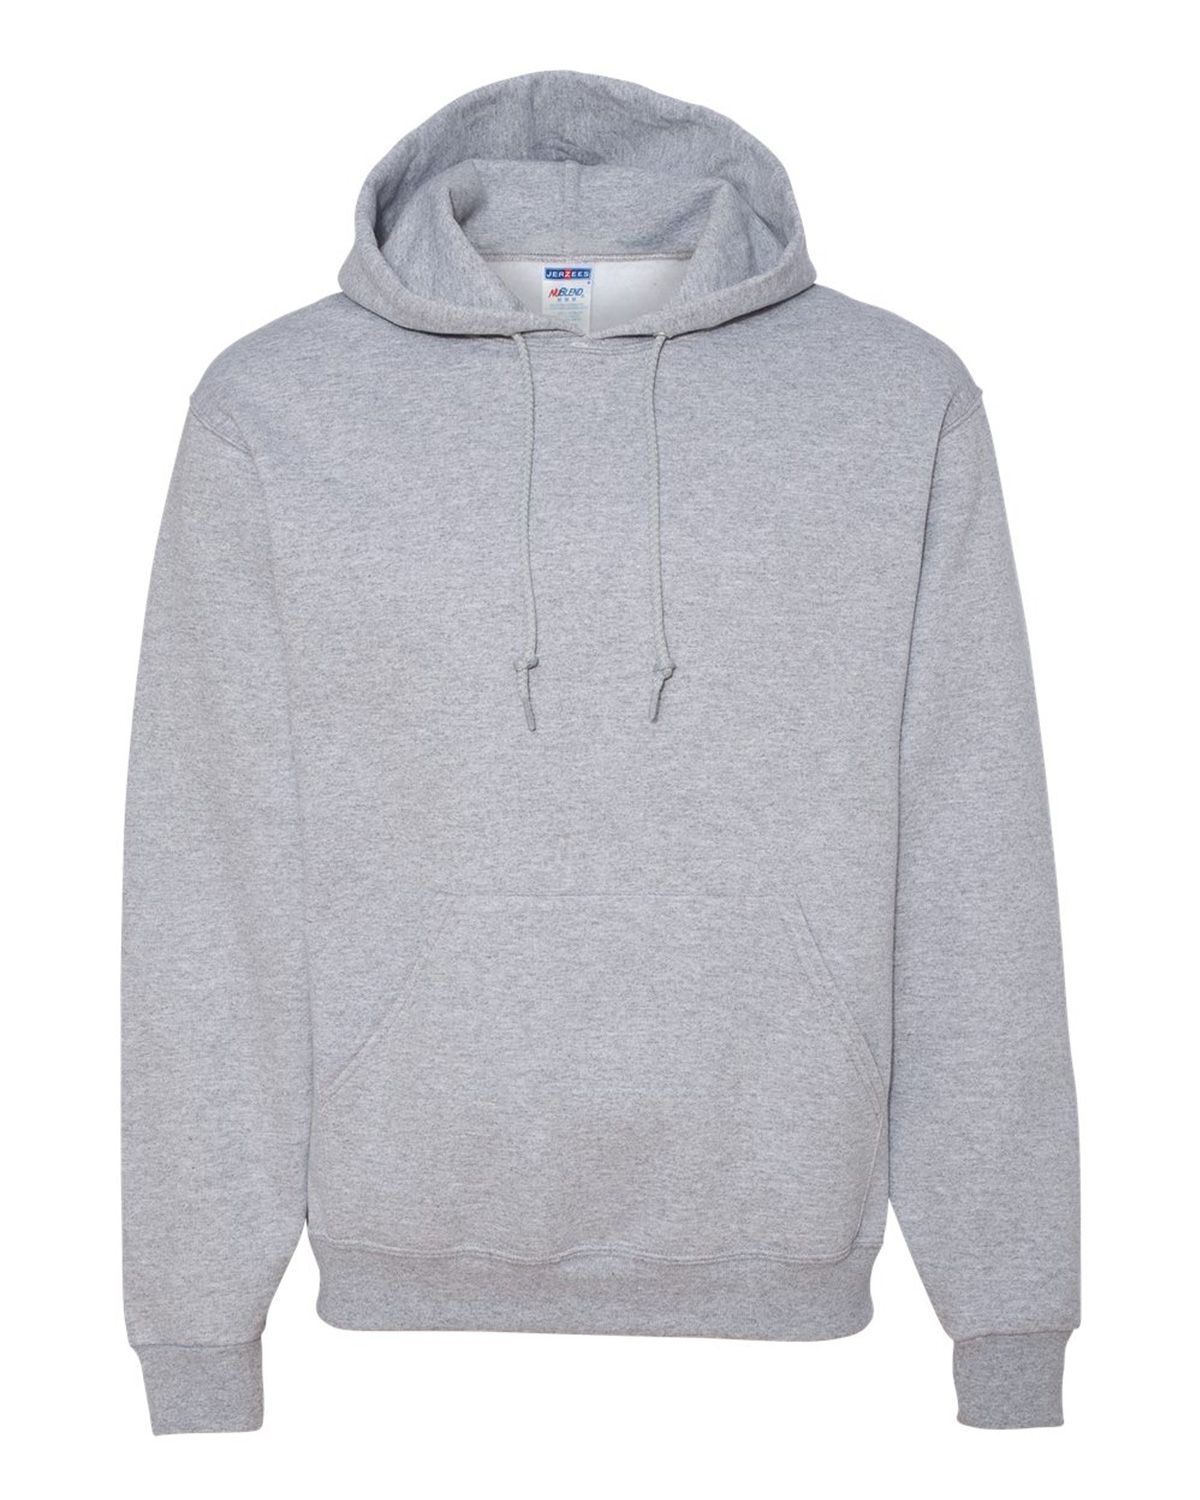 Jerzees 996MR NuBlend Hooded Sweatshirt - Free Shipping Available